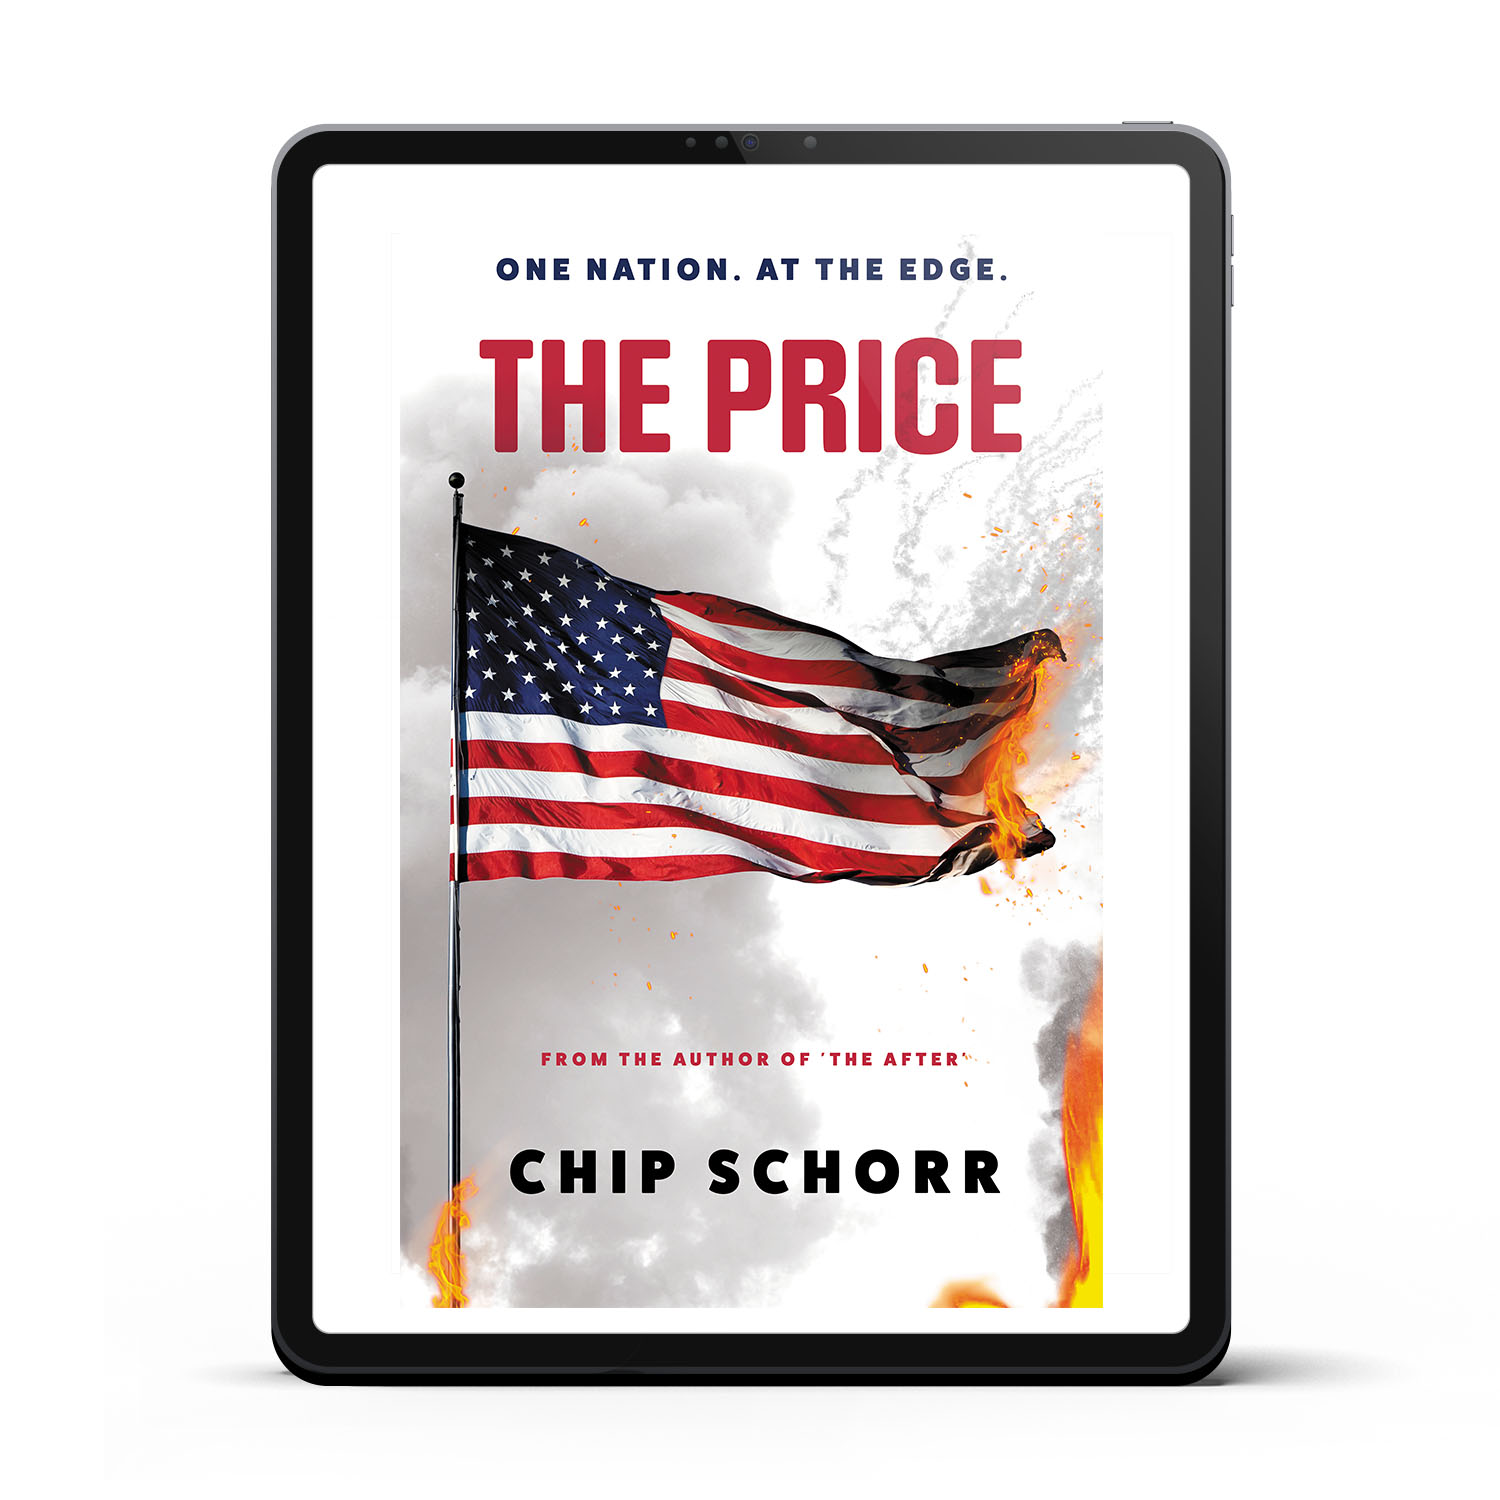 The Price is a twisting international conspiracy thriller. The author is Chip Schorr. The book cover and interior was designed by Mark Thomas of coverness.com. To find out more about my book design services, please visit www.coverness.com